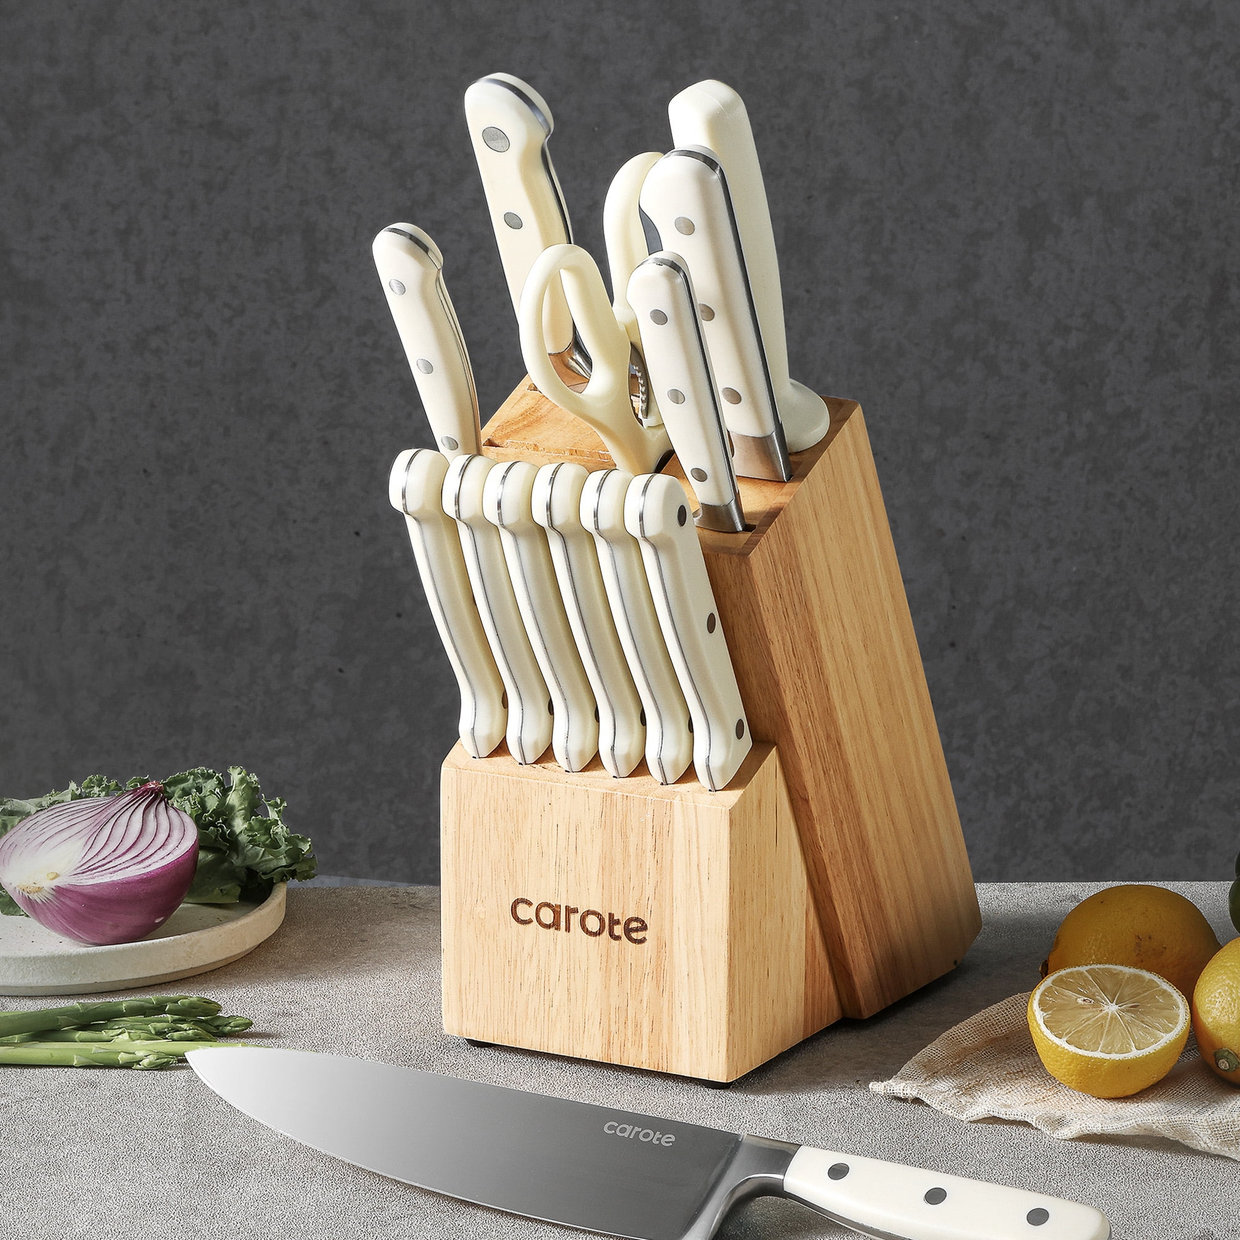 A set of white-handled kitchen knives in a wooden block, with vegetables and a knife on a countertop.